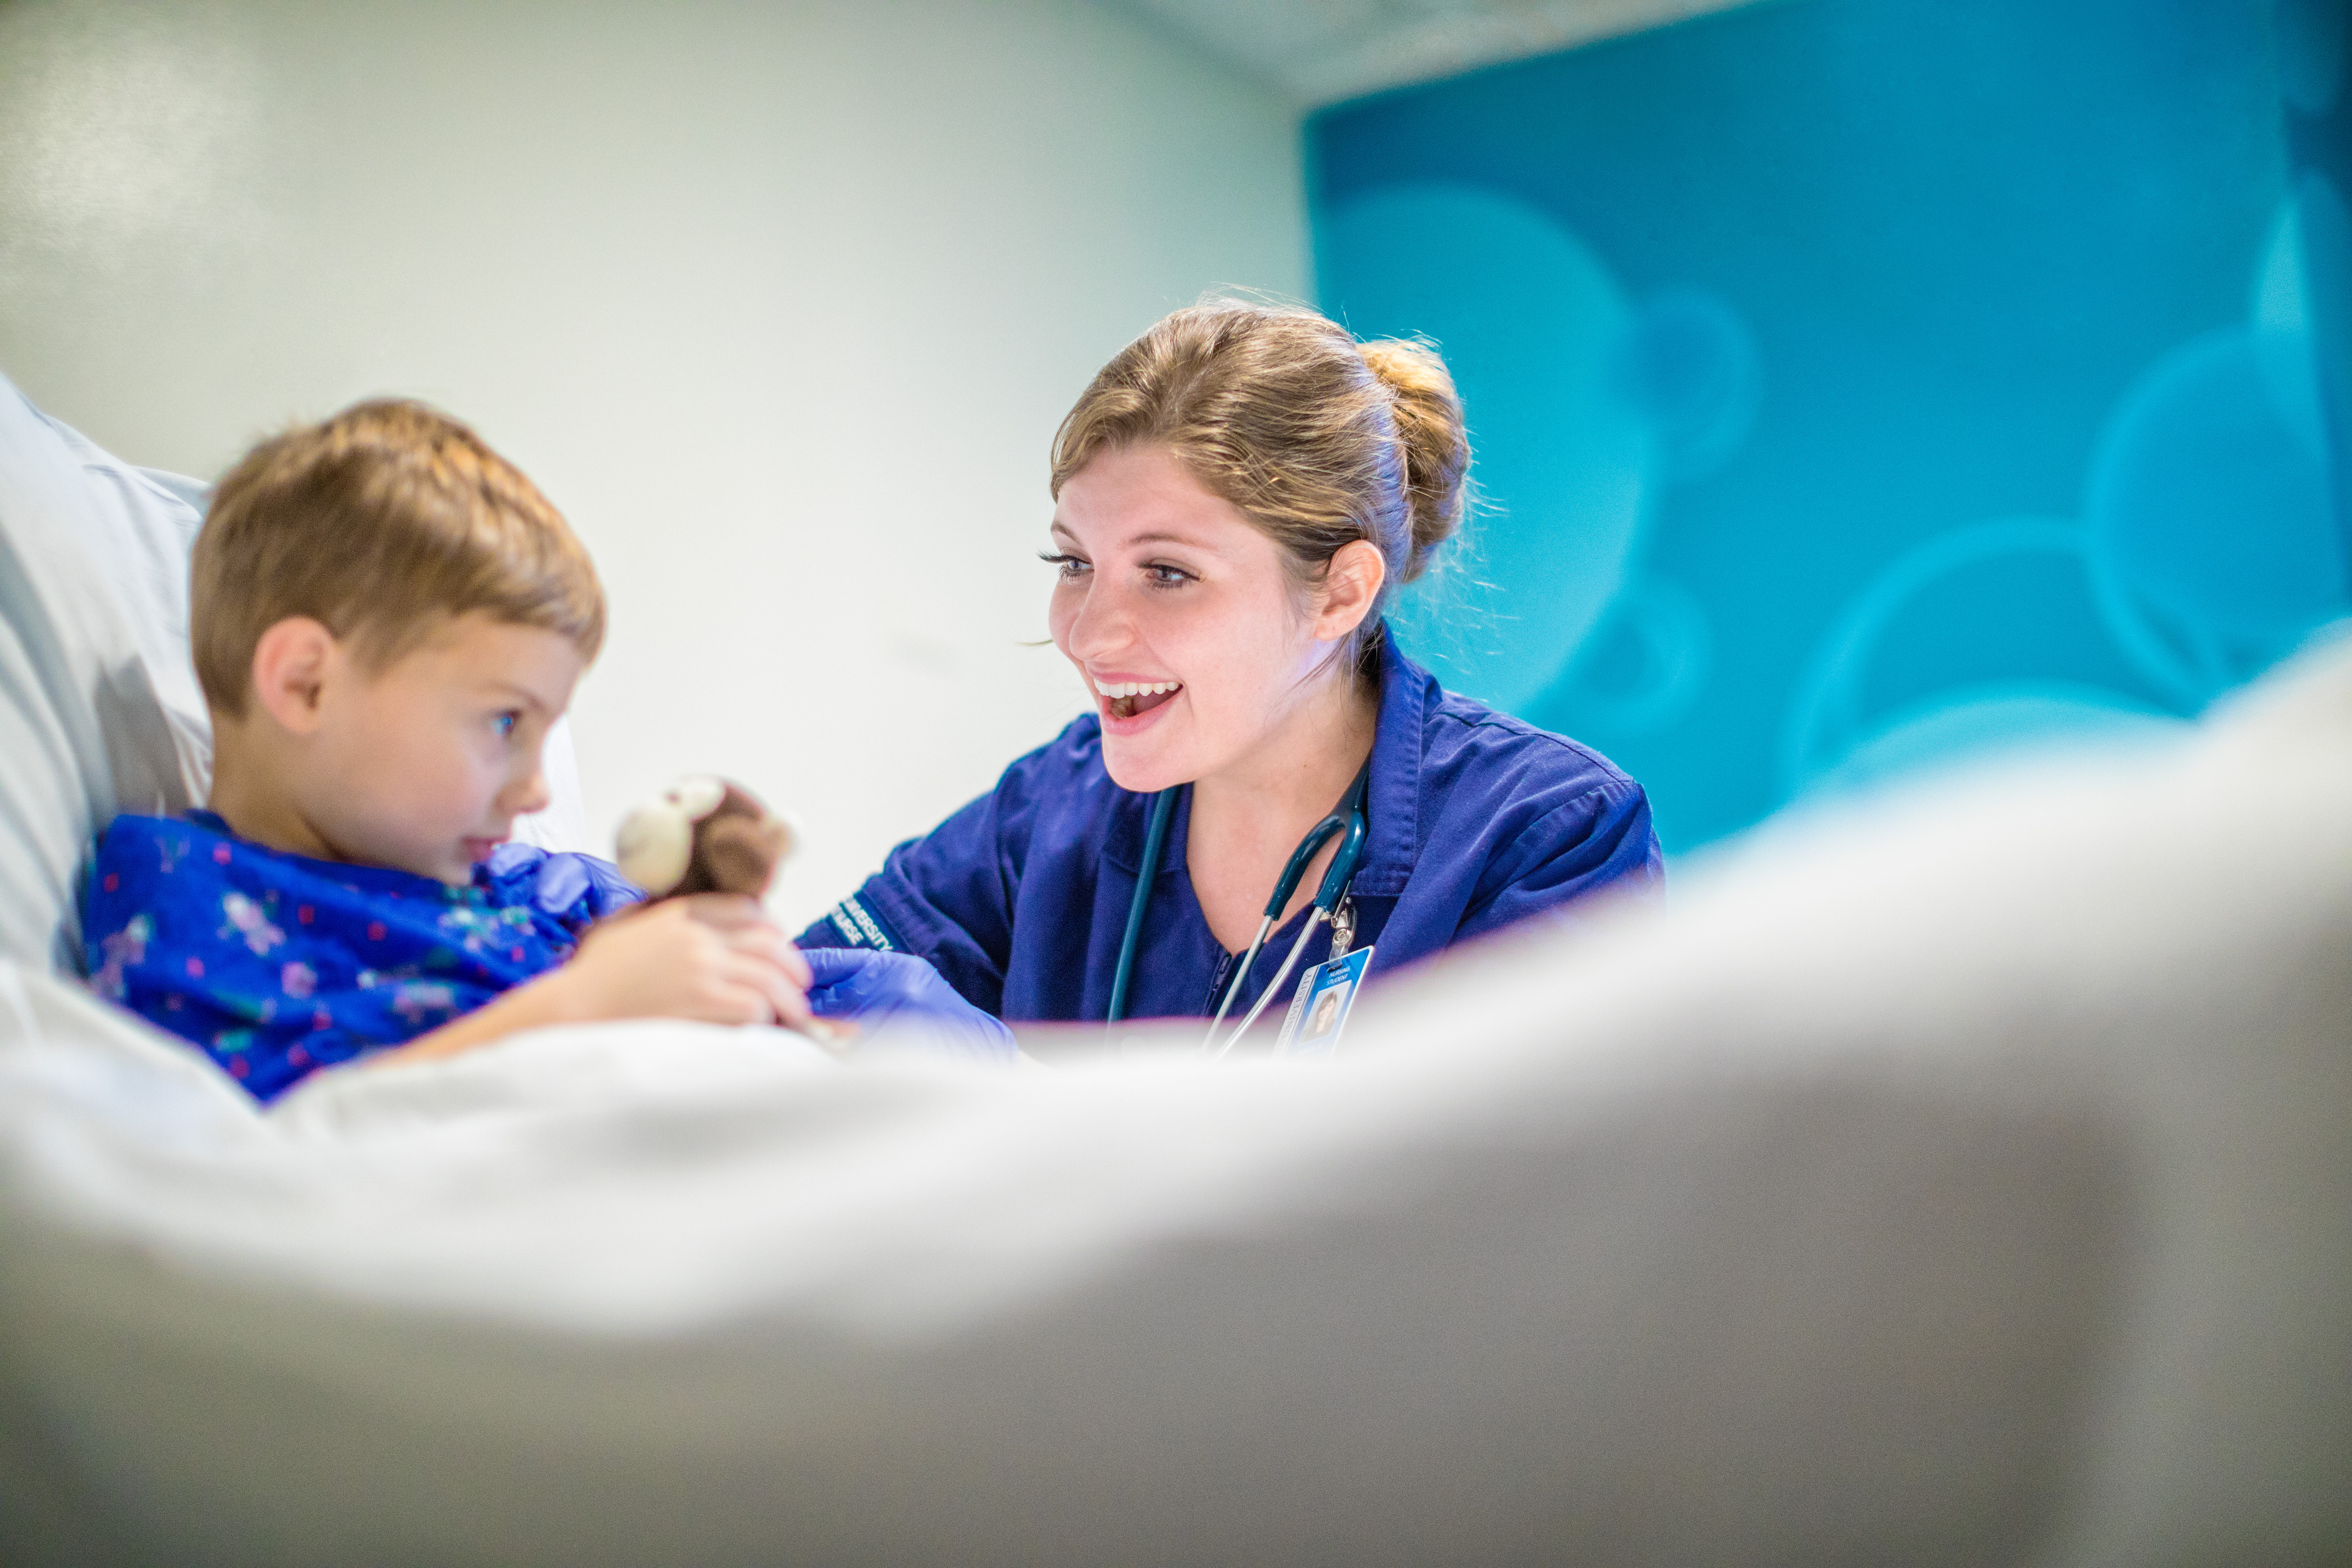 BJU's nursing program includes a six-semester clinical experience in local hospitals and doctor's offices